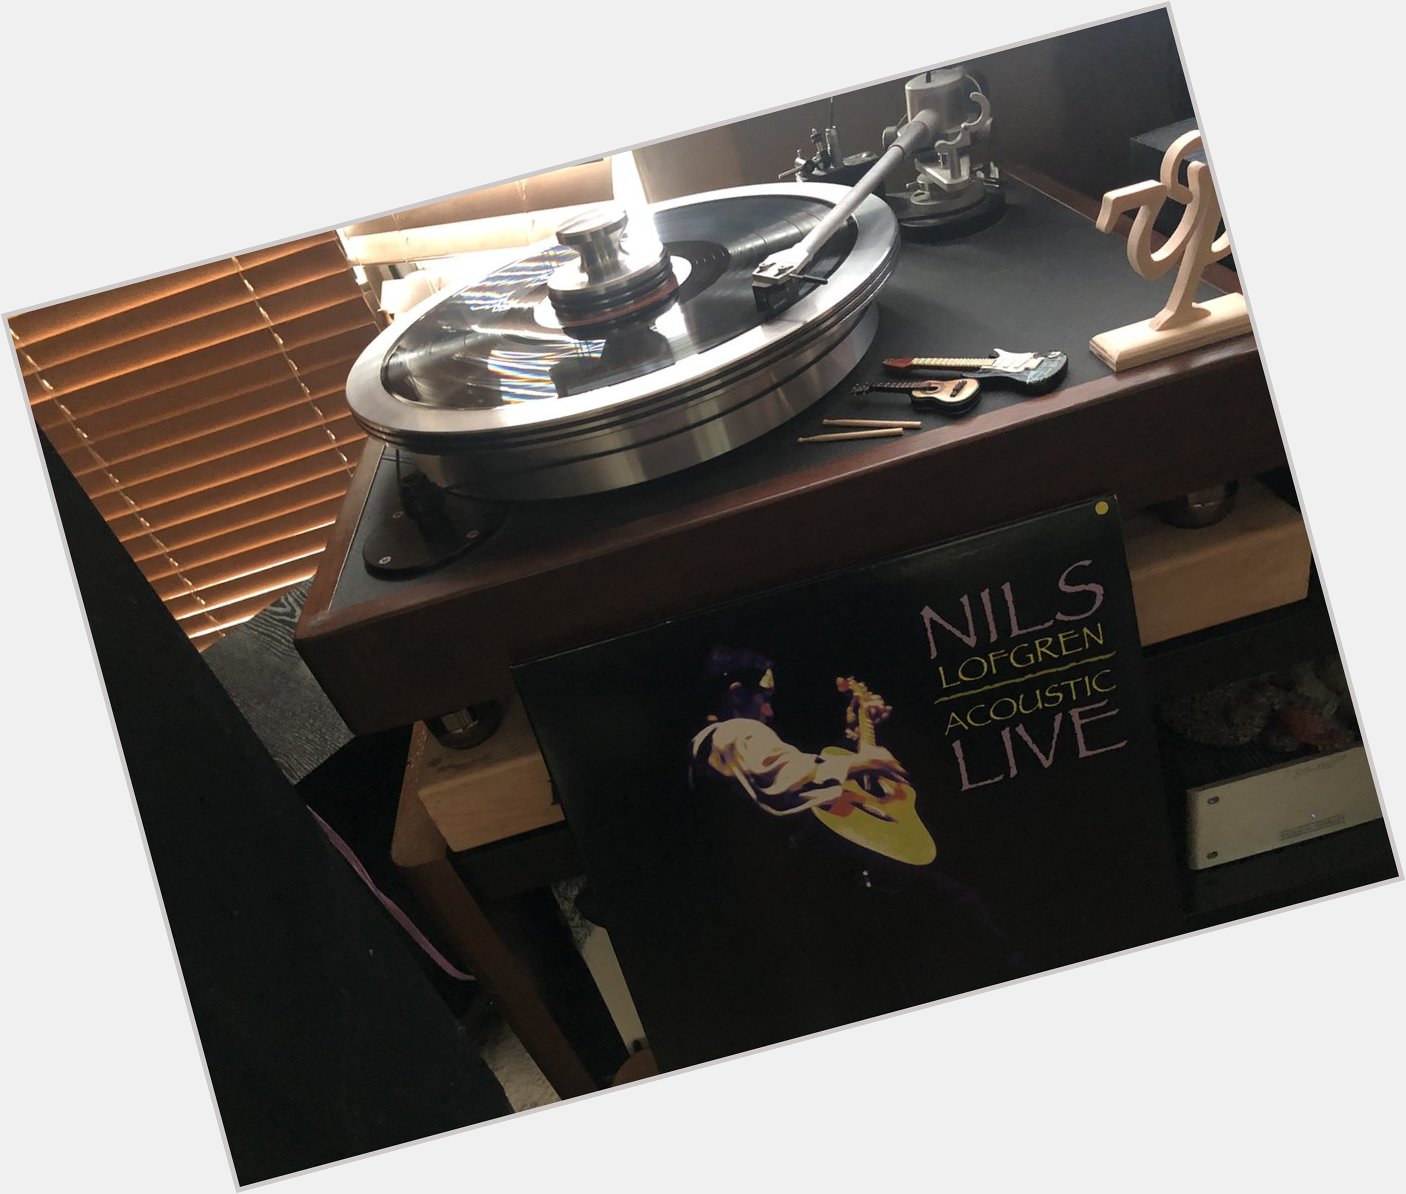 Happy belated birthday to the Crazy Horse & E Street stalwart!

Spinning Nils Lofgren Acoustic Live  